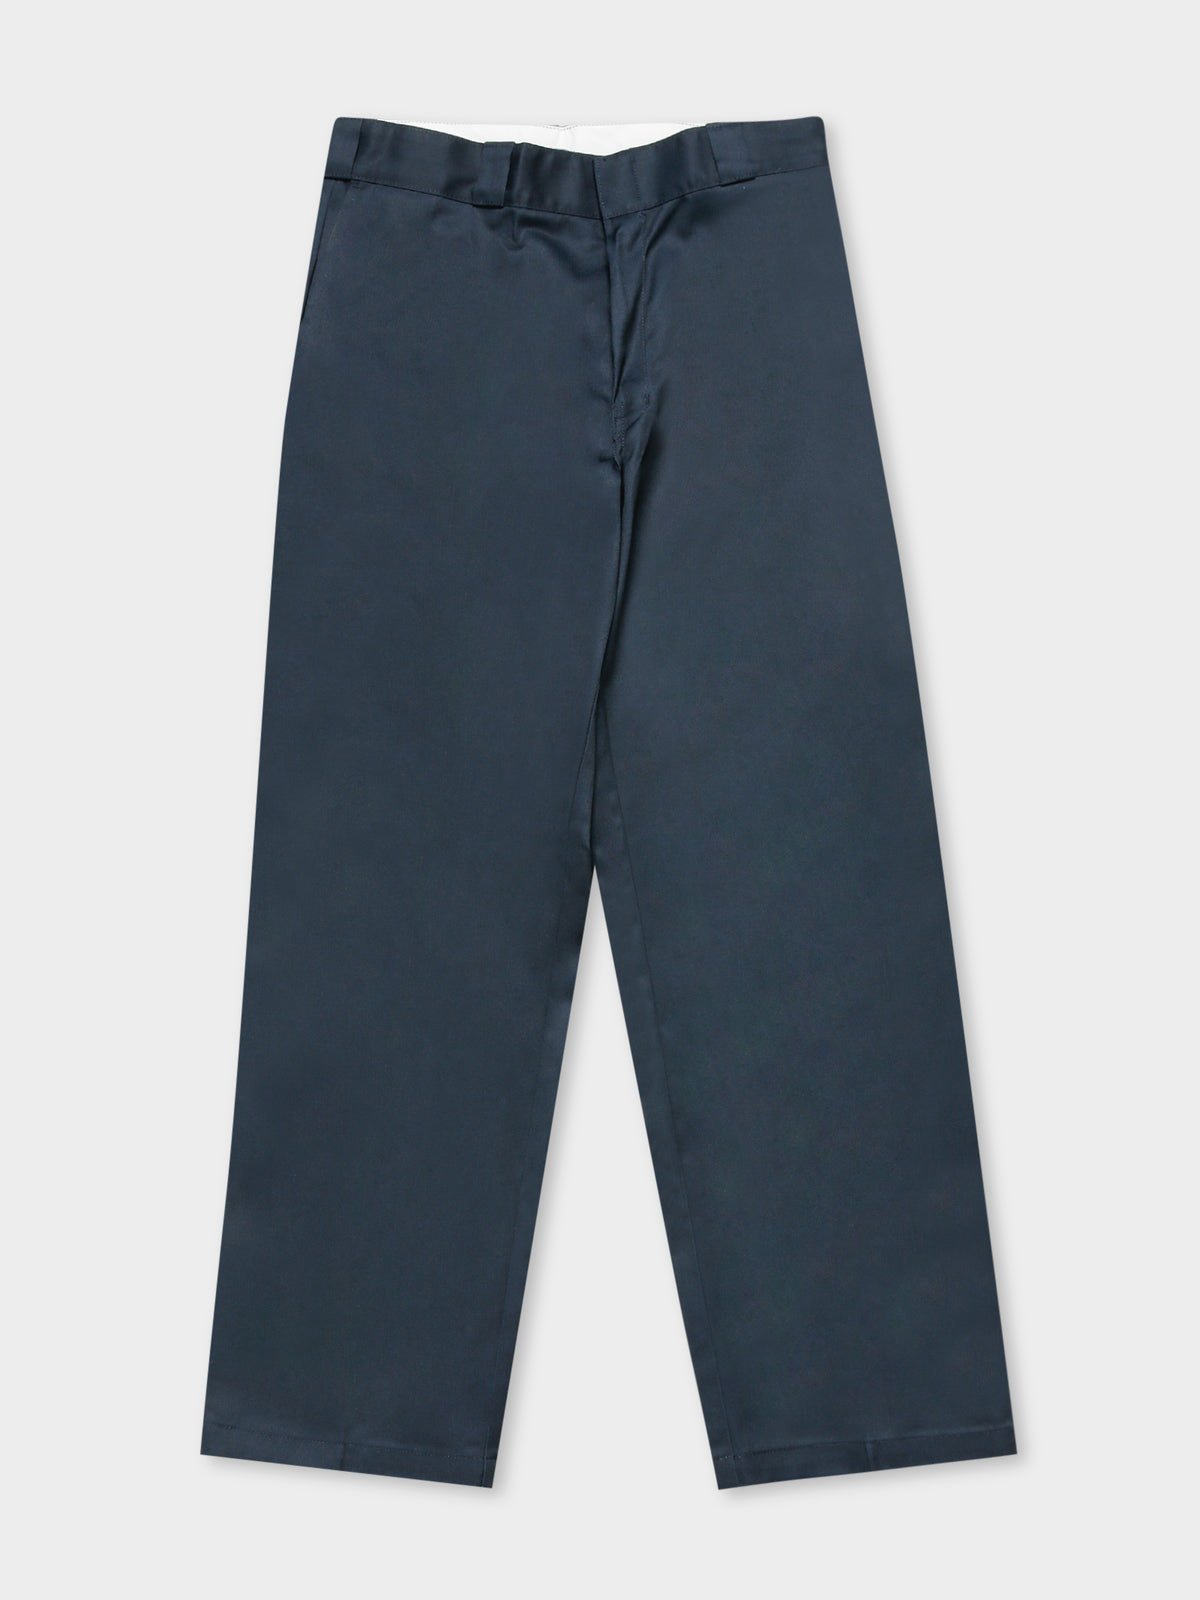 Super Baggy Loose Fit Pants in Navy